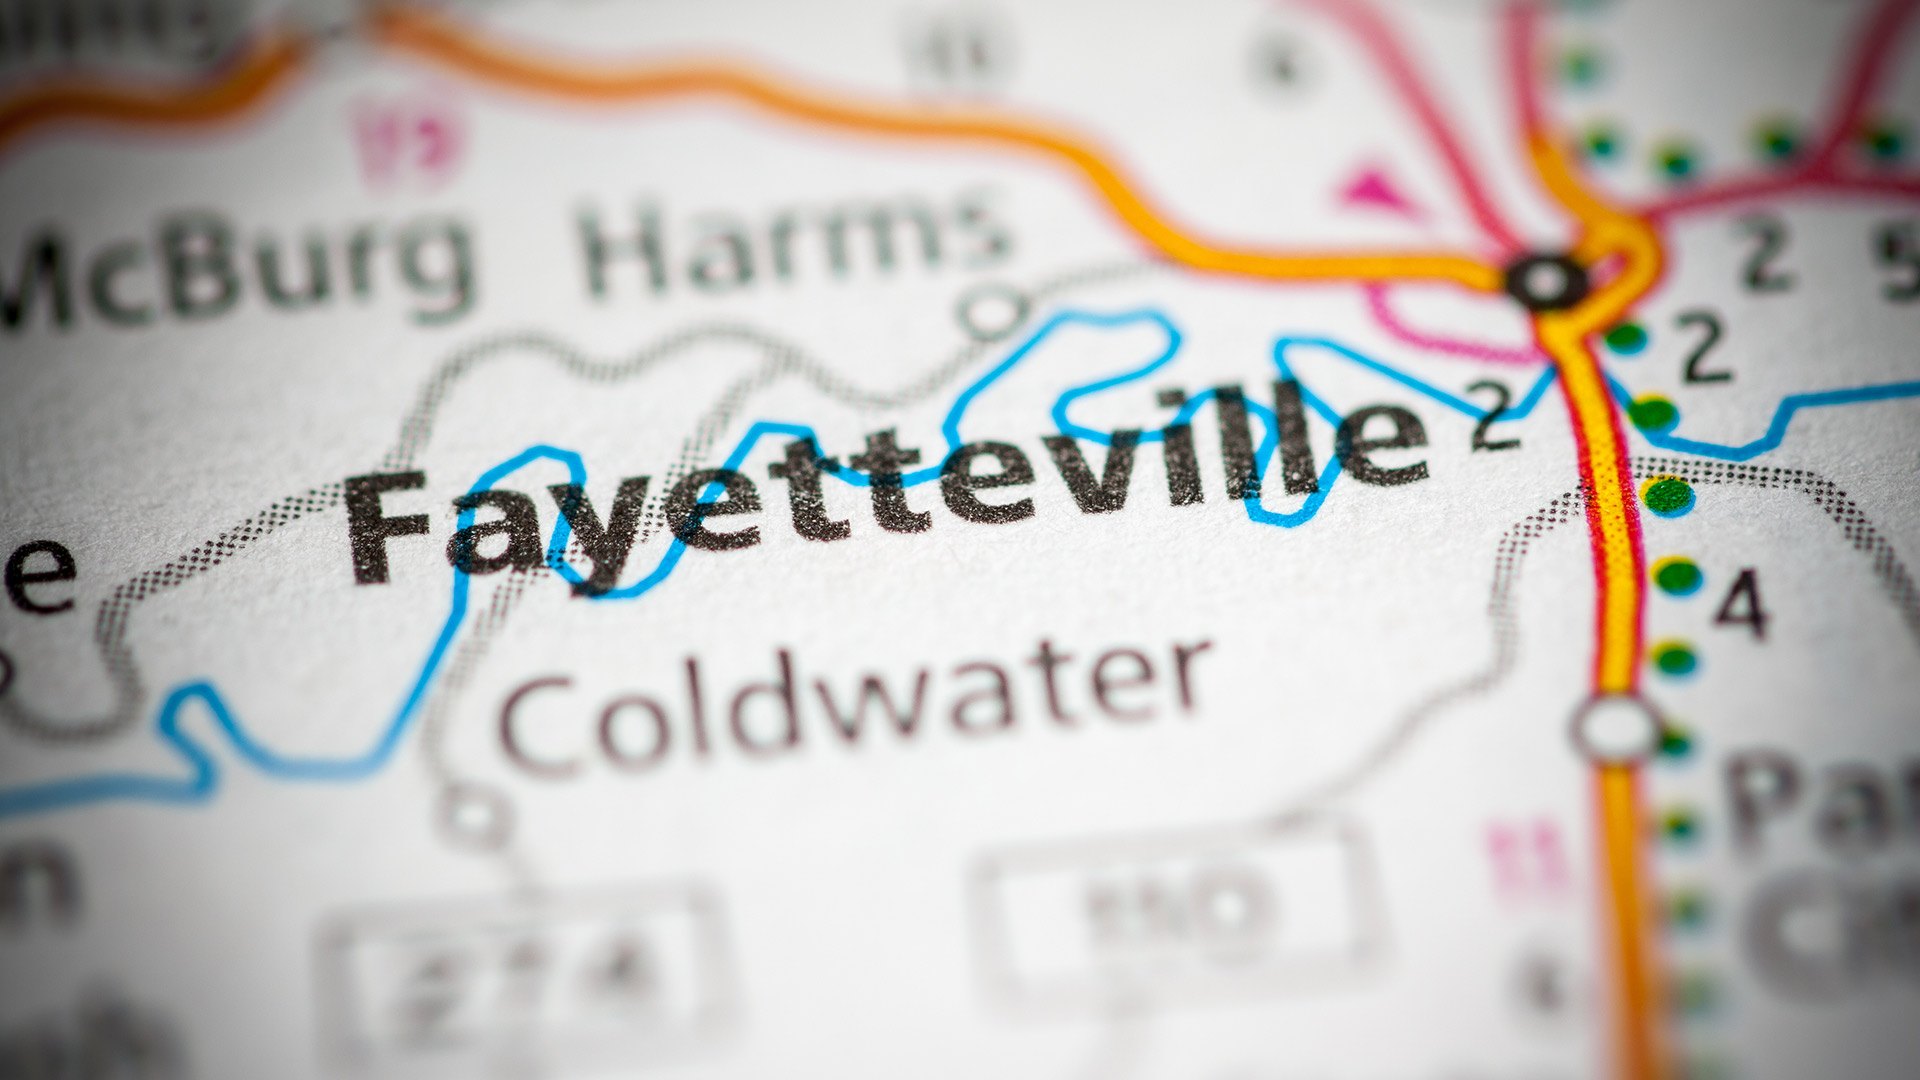 Fayetteville shown on a map.